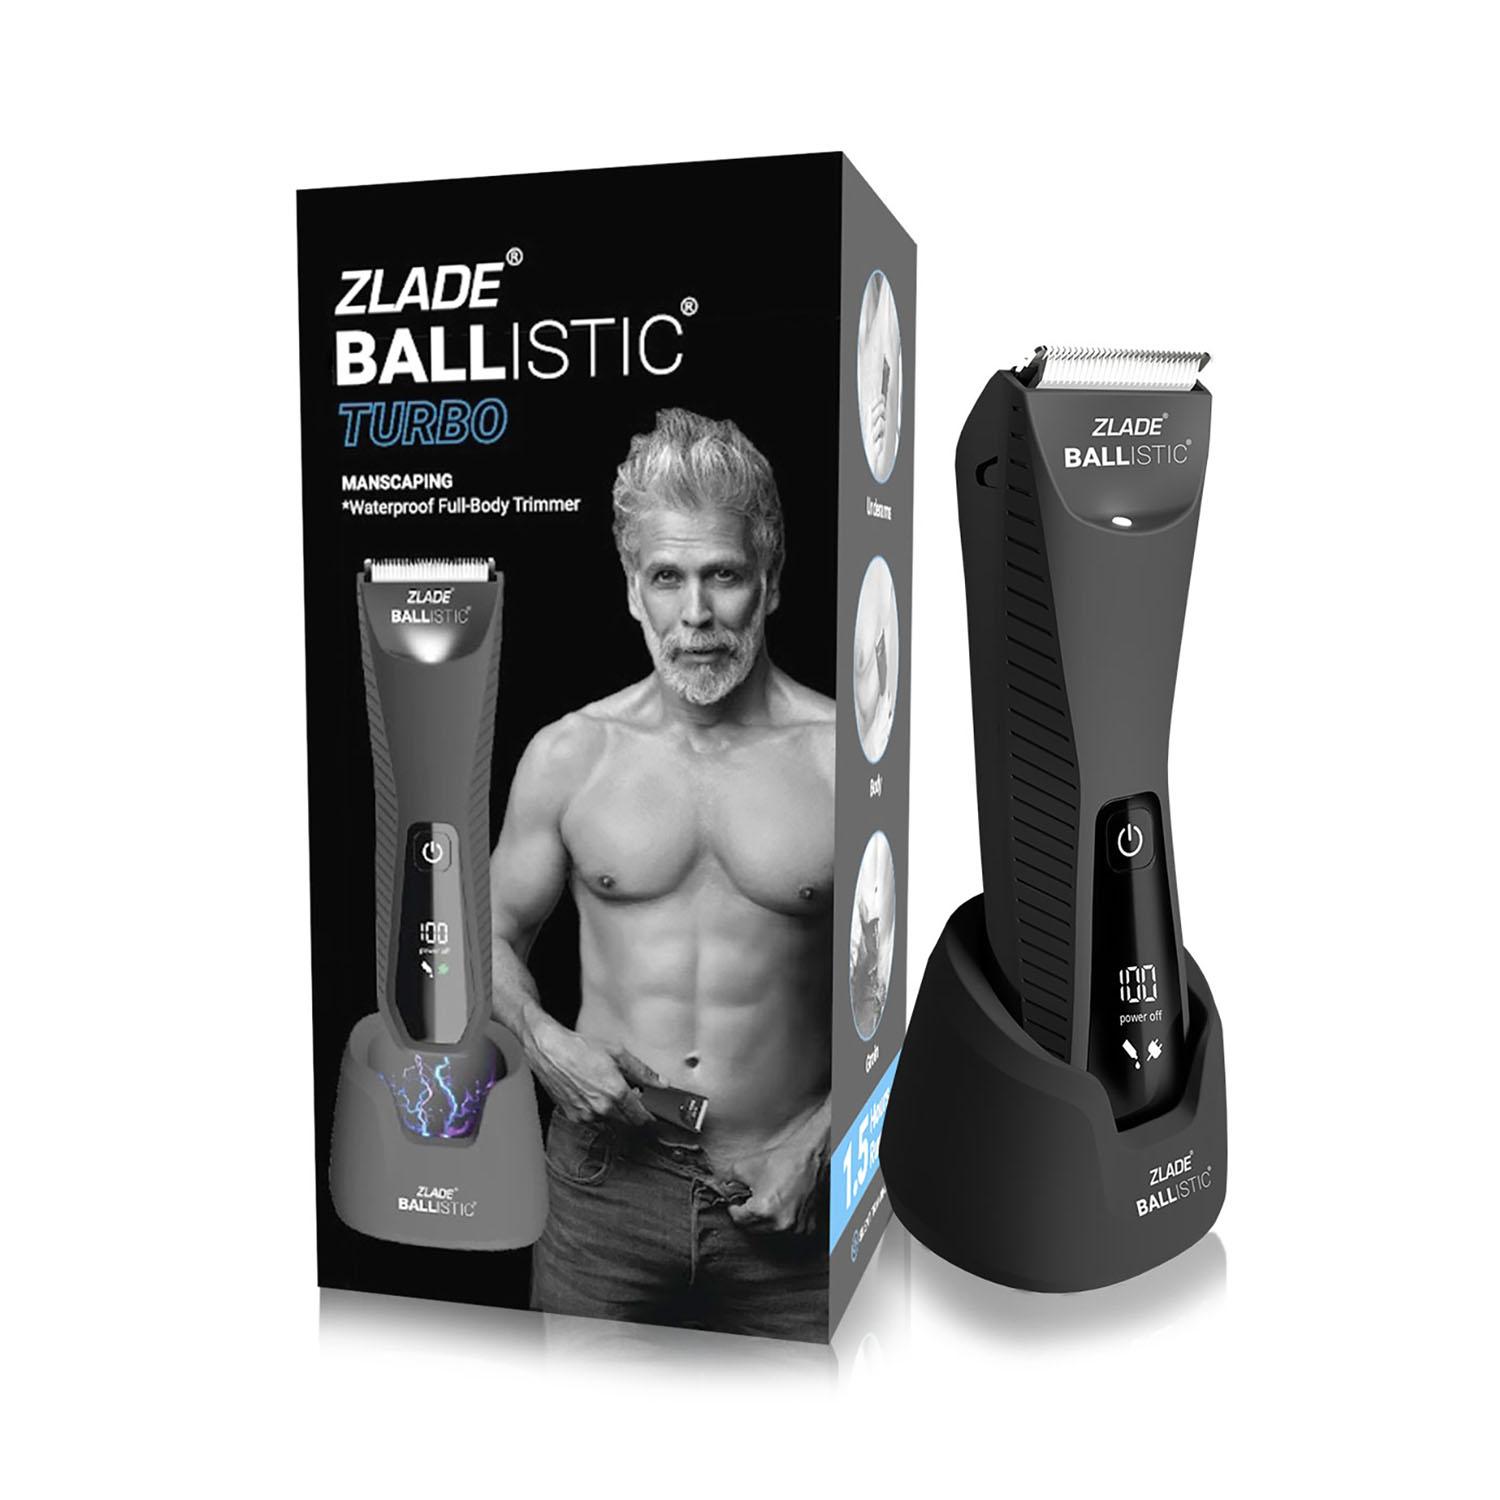 Zlade | Zlade Ballistic Manscaping Full-Body Trimmer TURBO 3.0 with Detachable Ceramic Blades